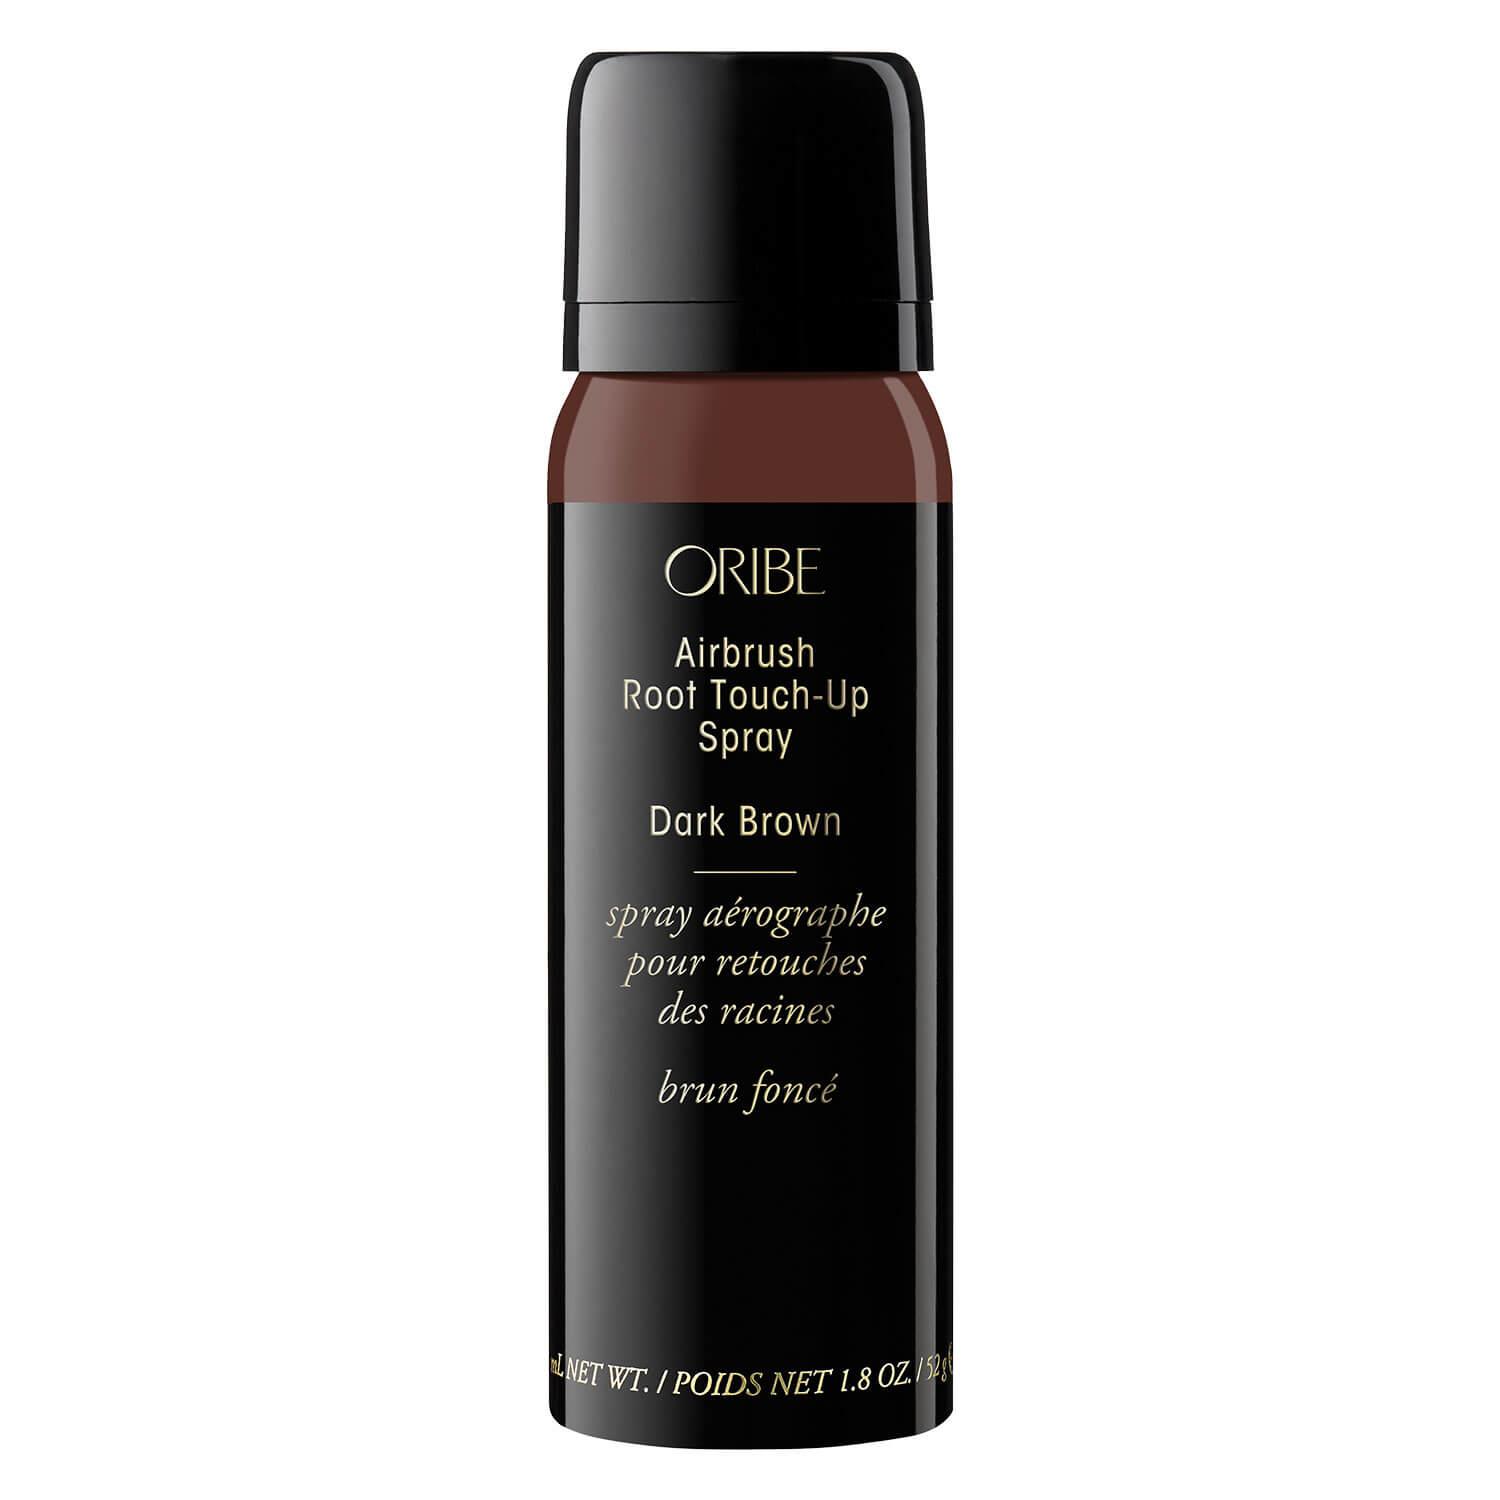 Oribe Style - Airbrush Root Touch-Up Spray Dark Brown